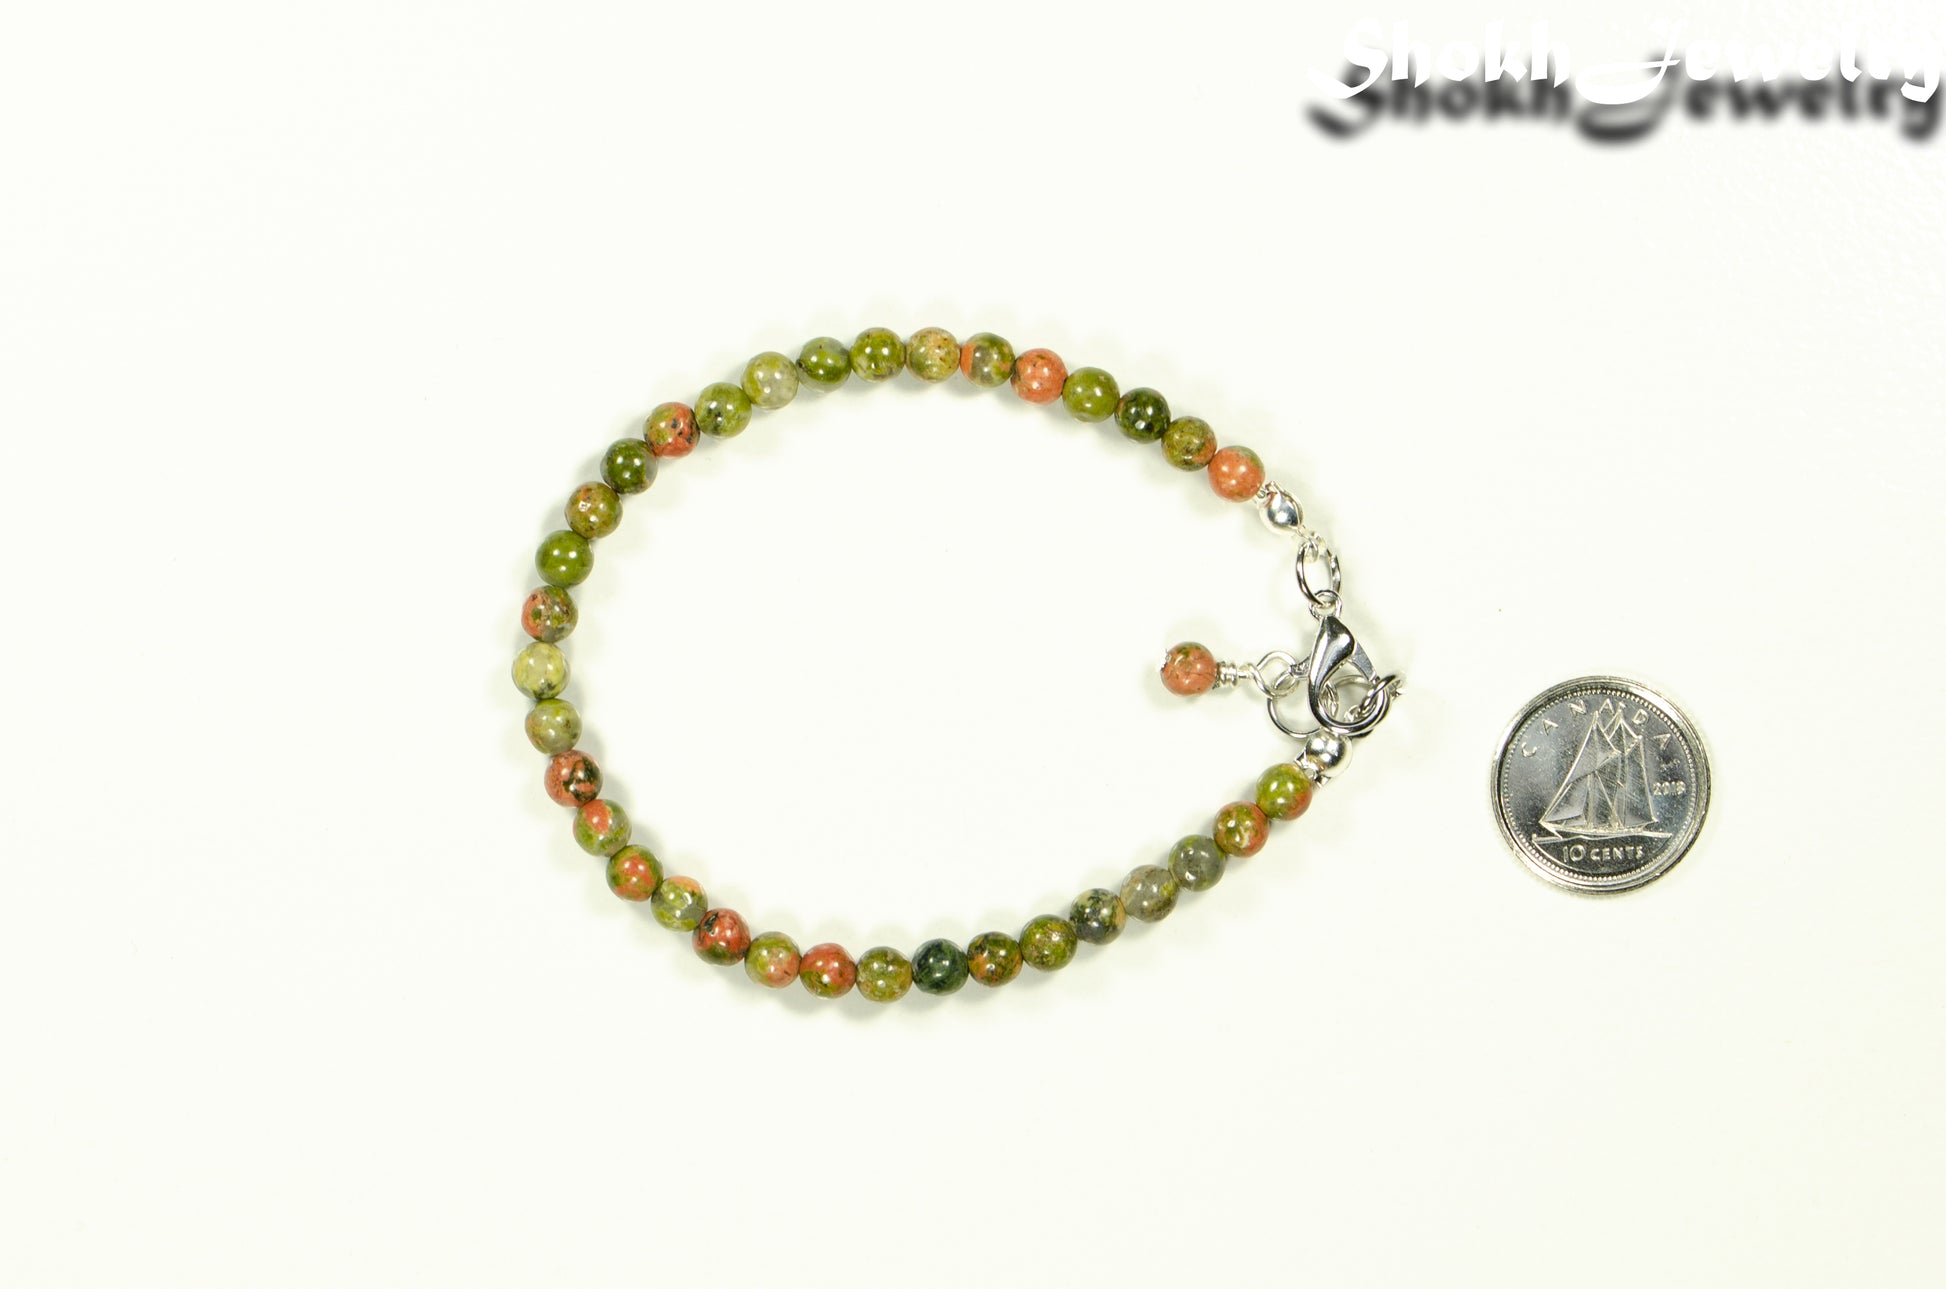 4mm Natural Unakite Bracelet with Clasp beside a dime.